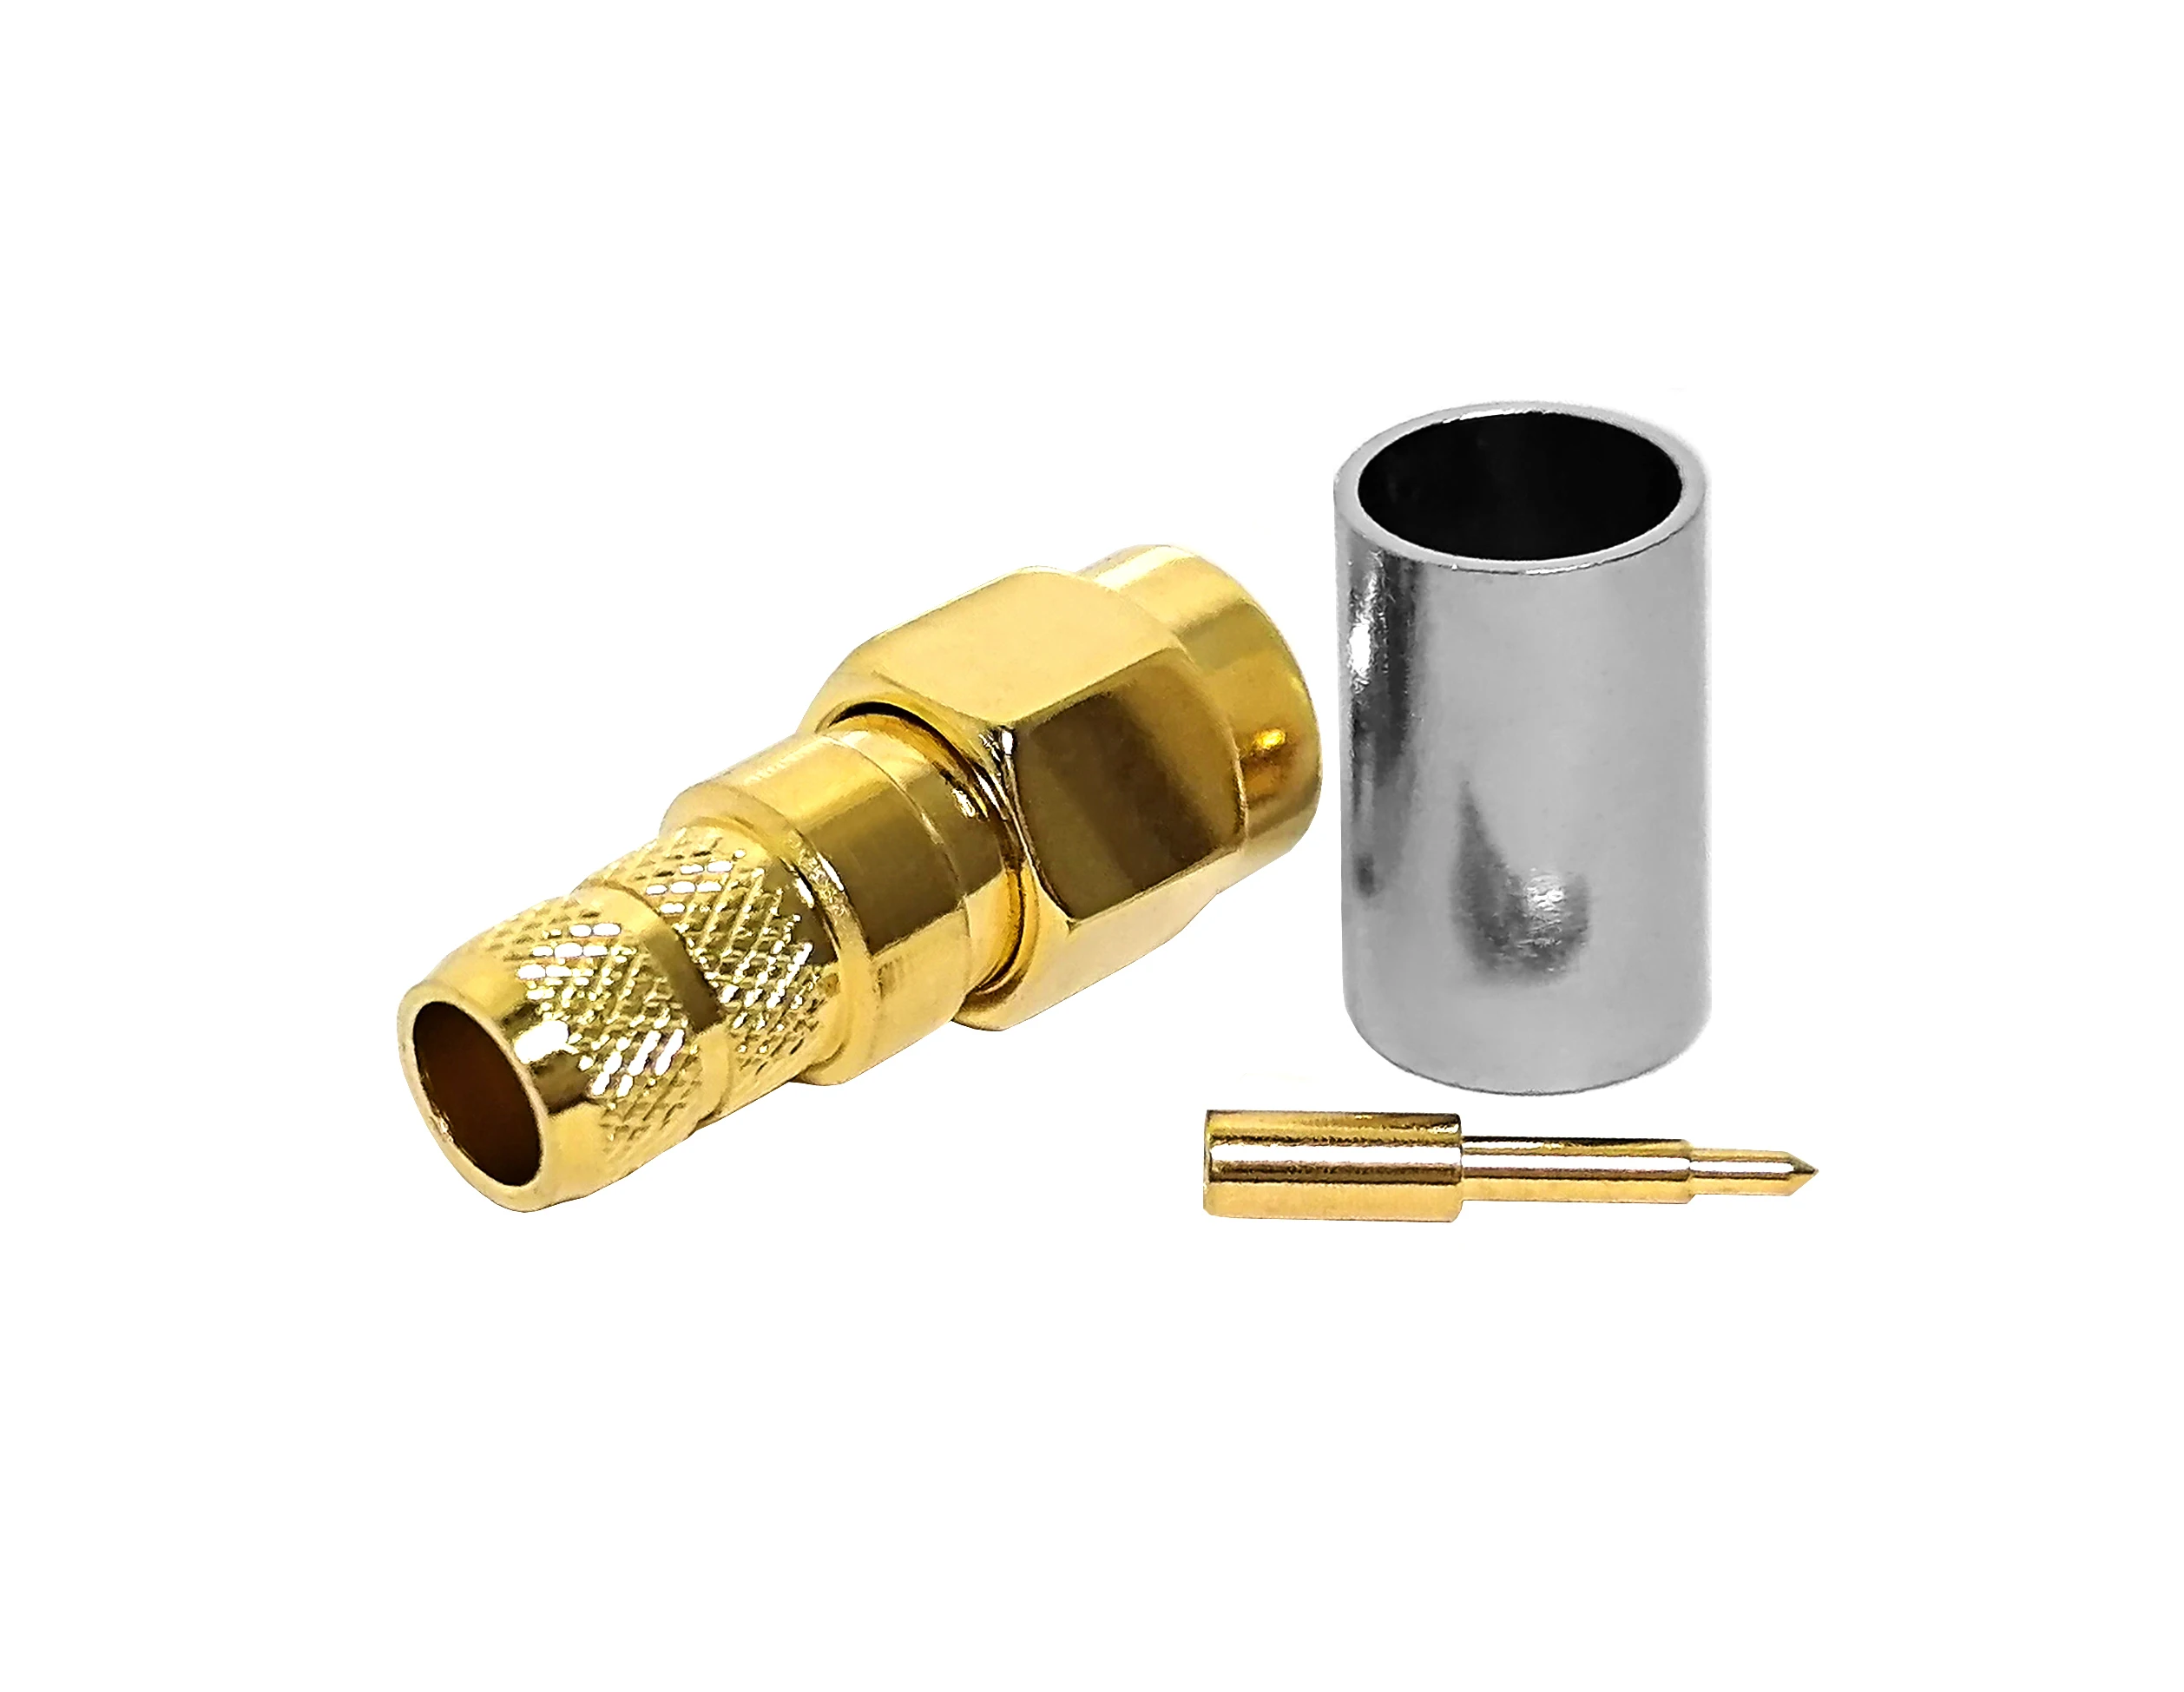 RF connector SMA type male pin straight crimp for LMR240 H155 4DFB RG59 RF coaxial cable plug with golden